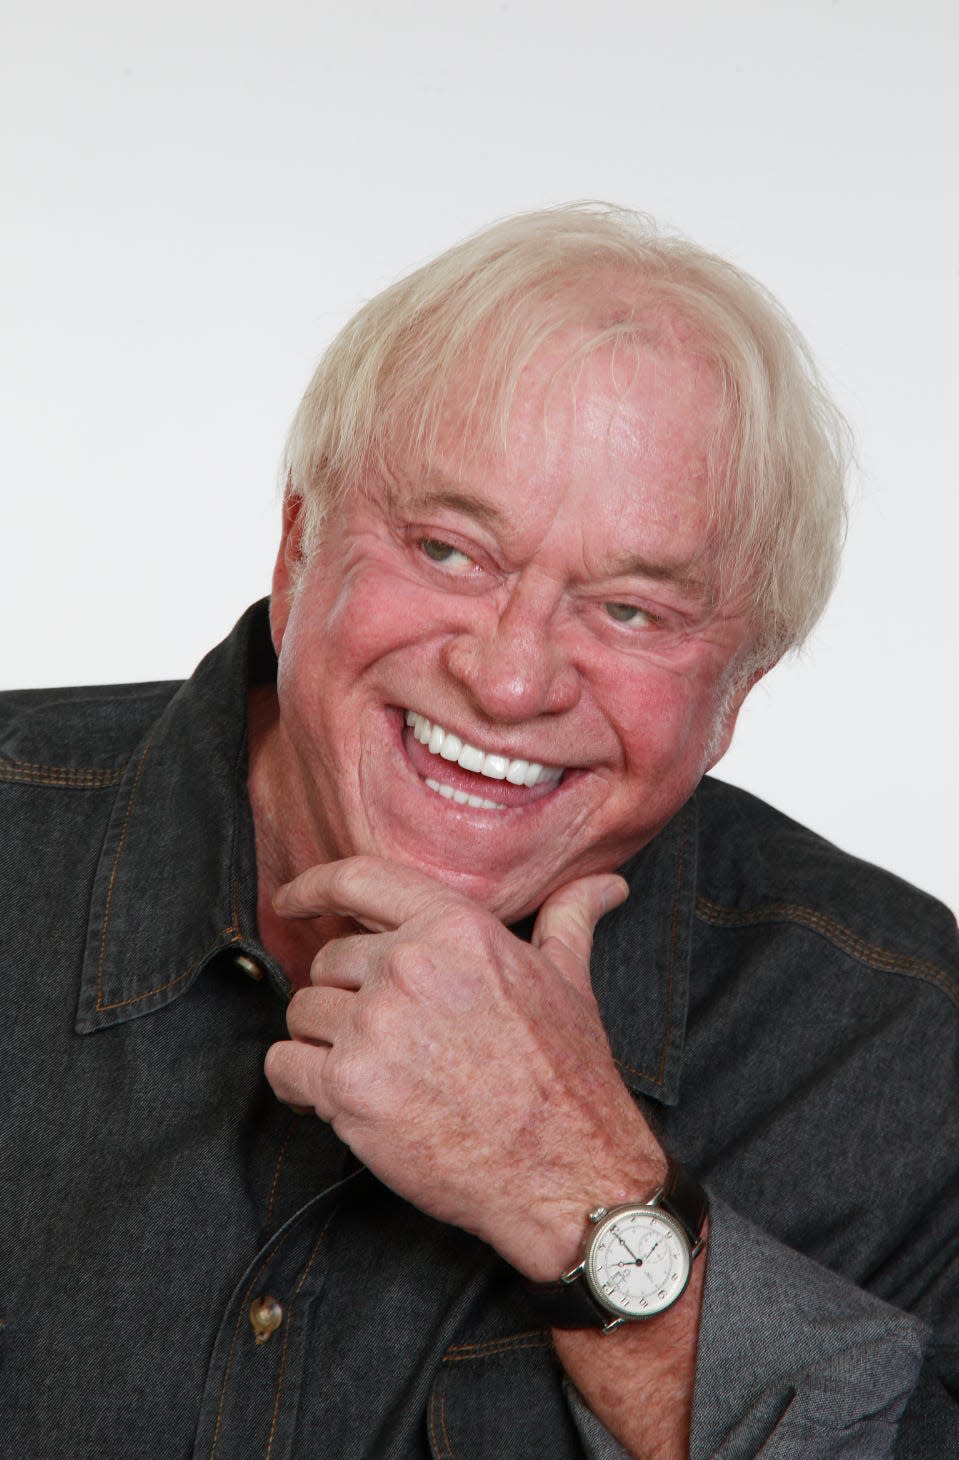 Comedian James Gregory will bring his show, “The Funniest Man in America,” to the Coughlin-Saunders Performing Arts Center at 7 p.m. Saturday.